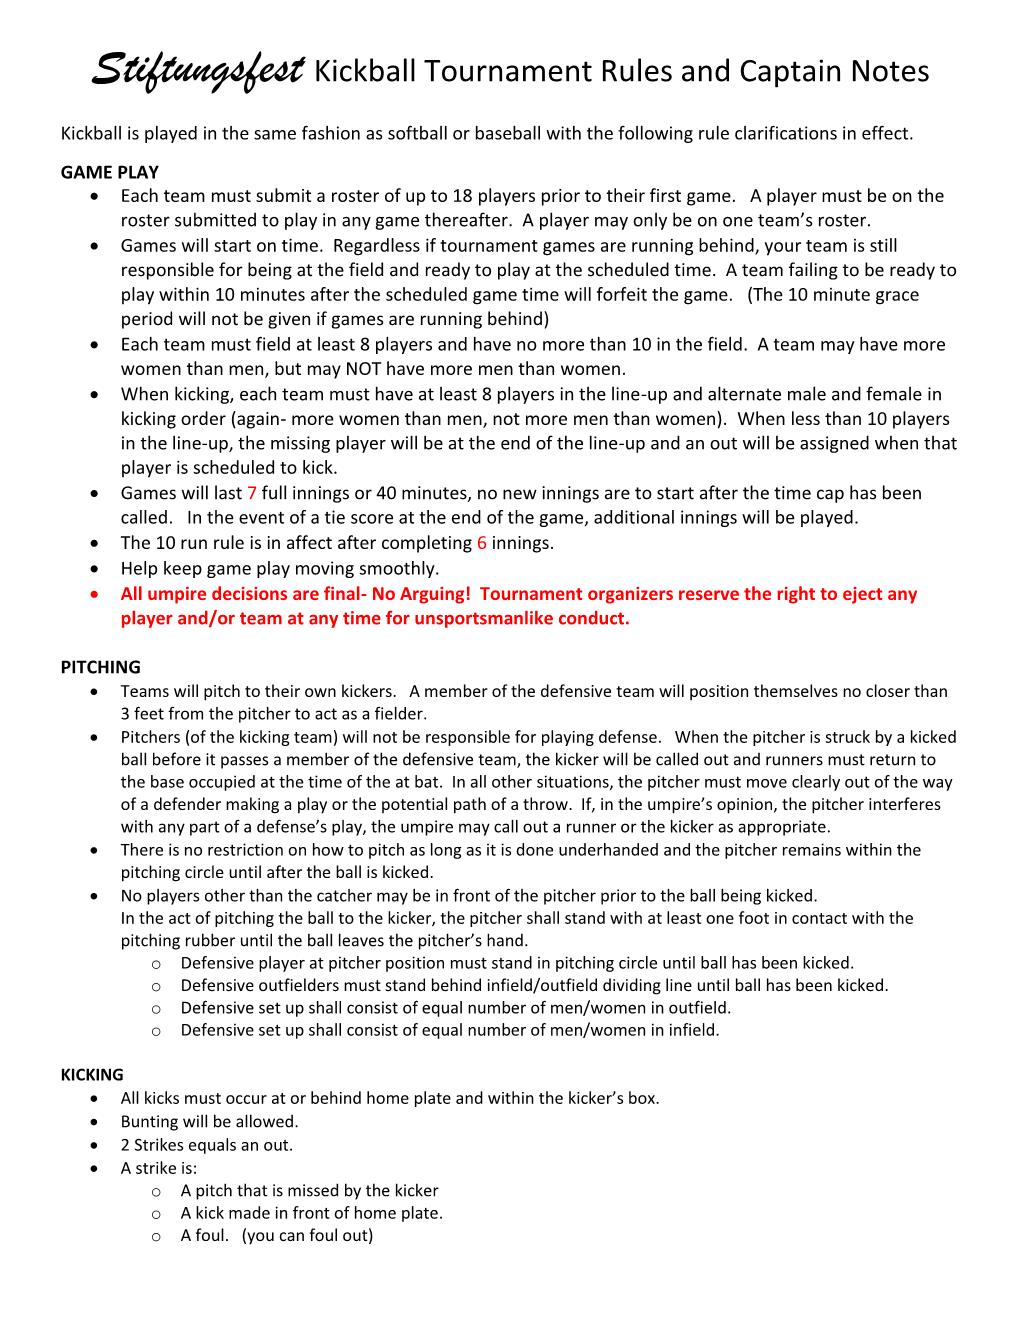 Stiftungsfest Kickball Tournament Rules and Captain Notes